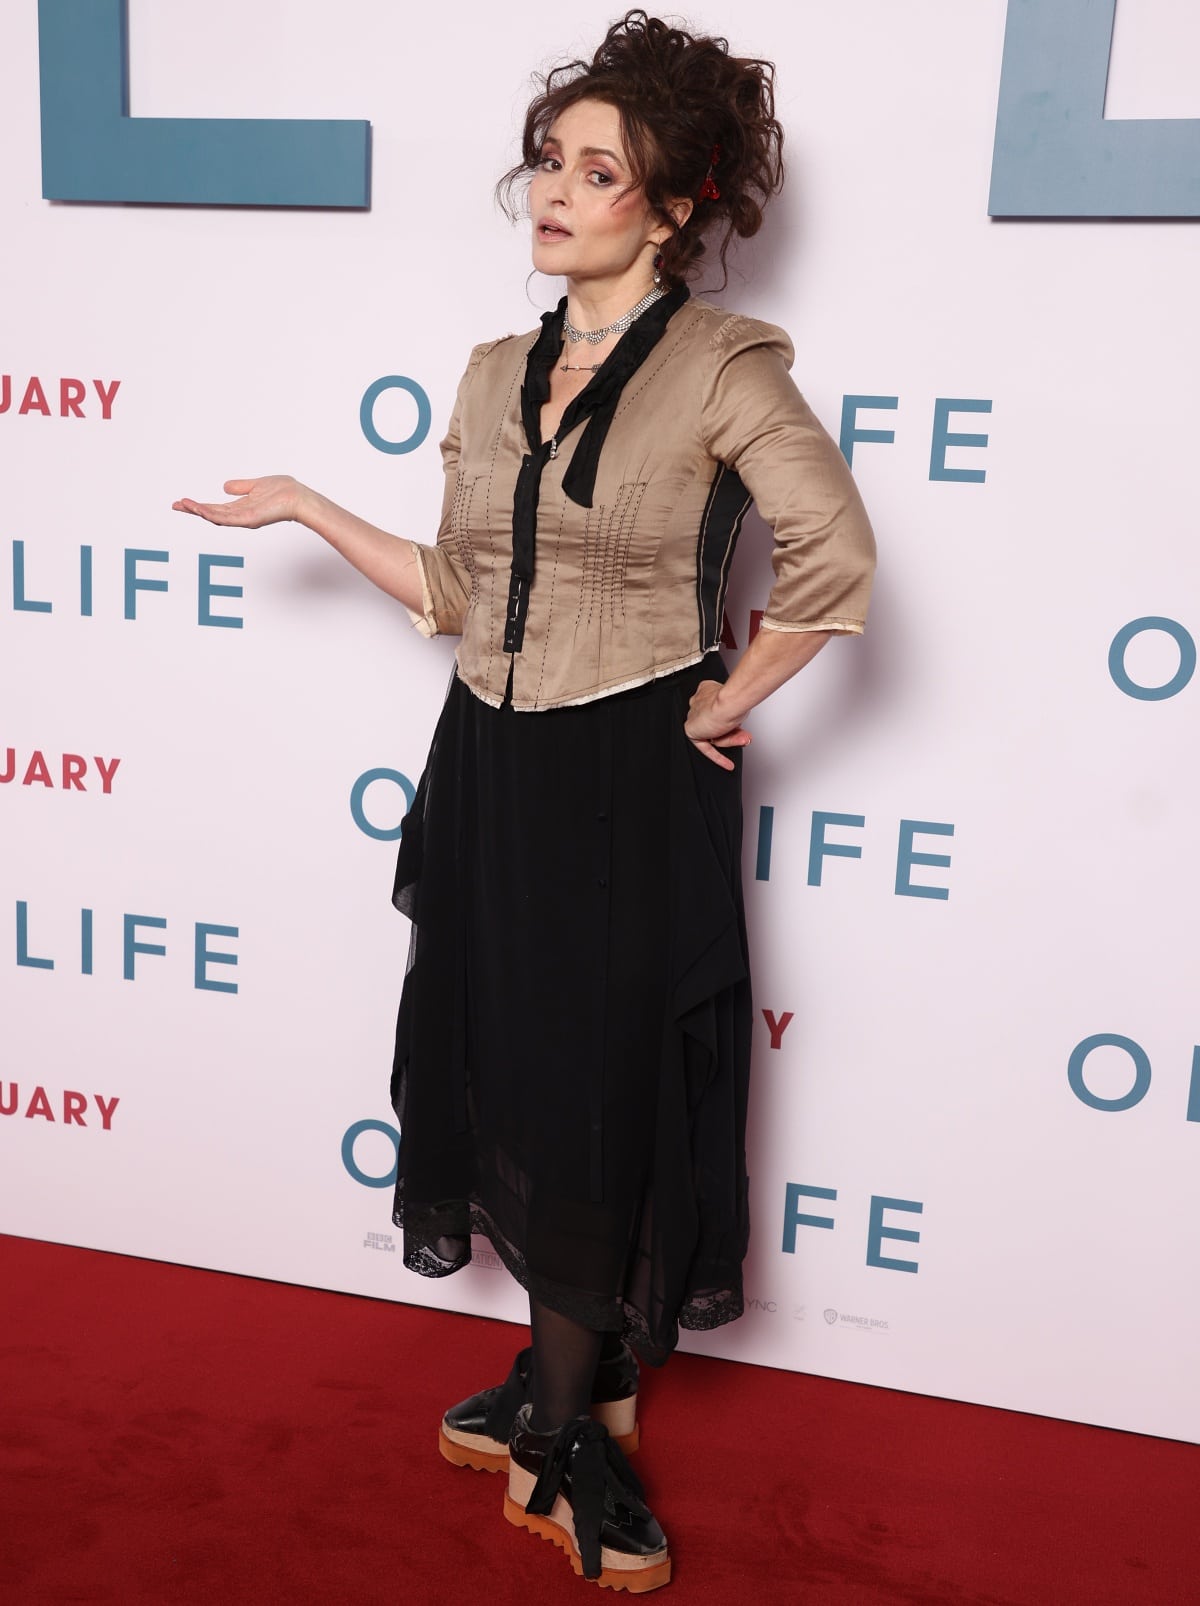 Helena Bonham Carter wearing platform black brogues with brown soles to complement her outfit